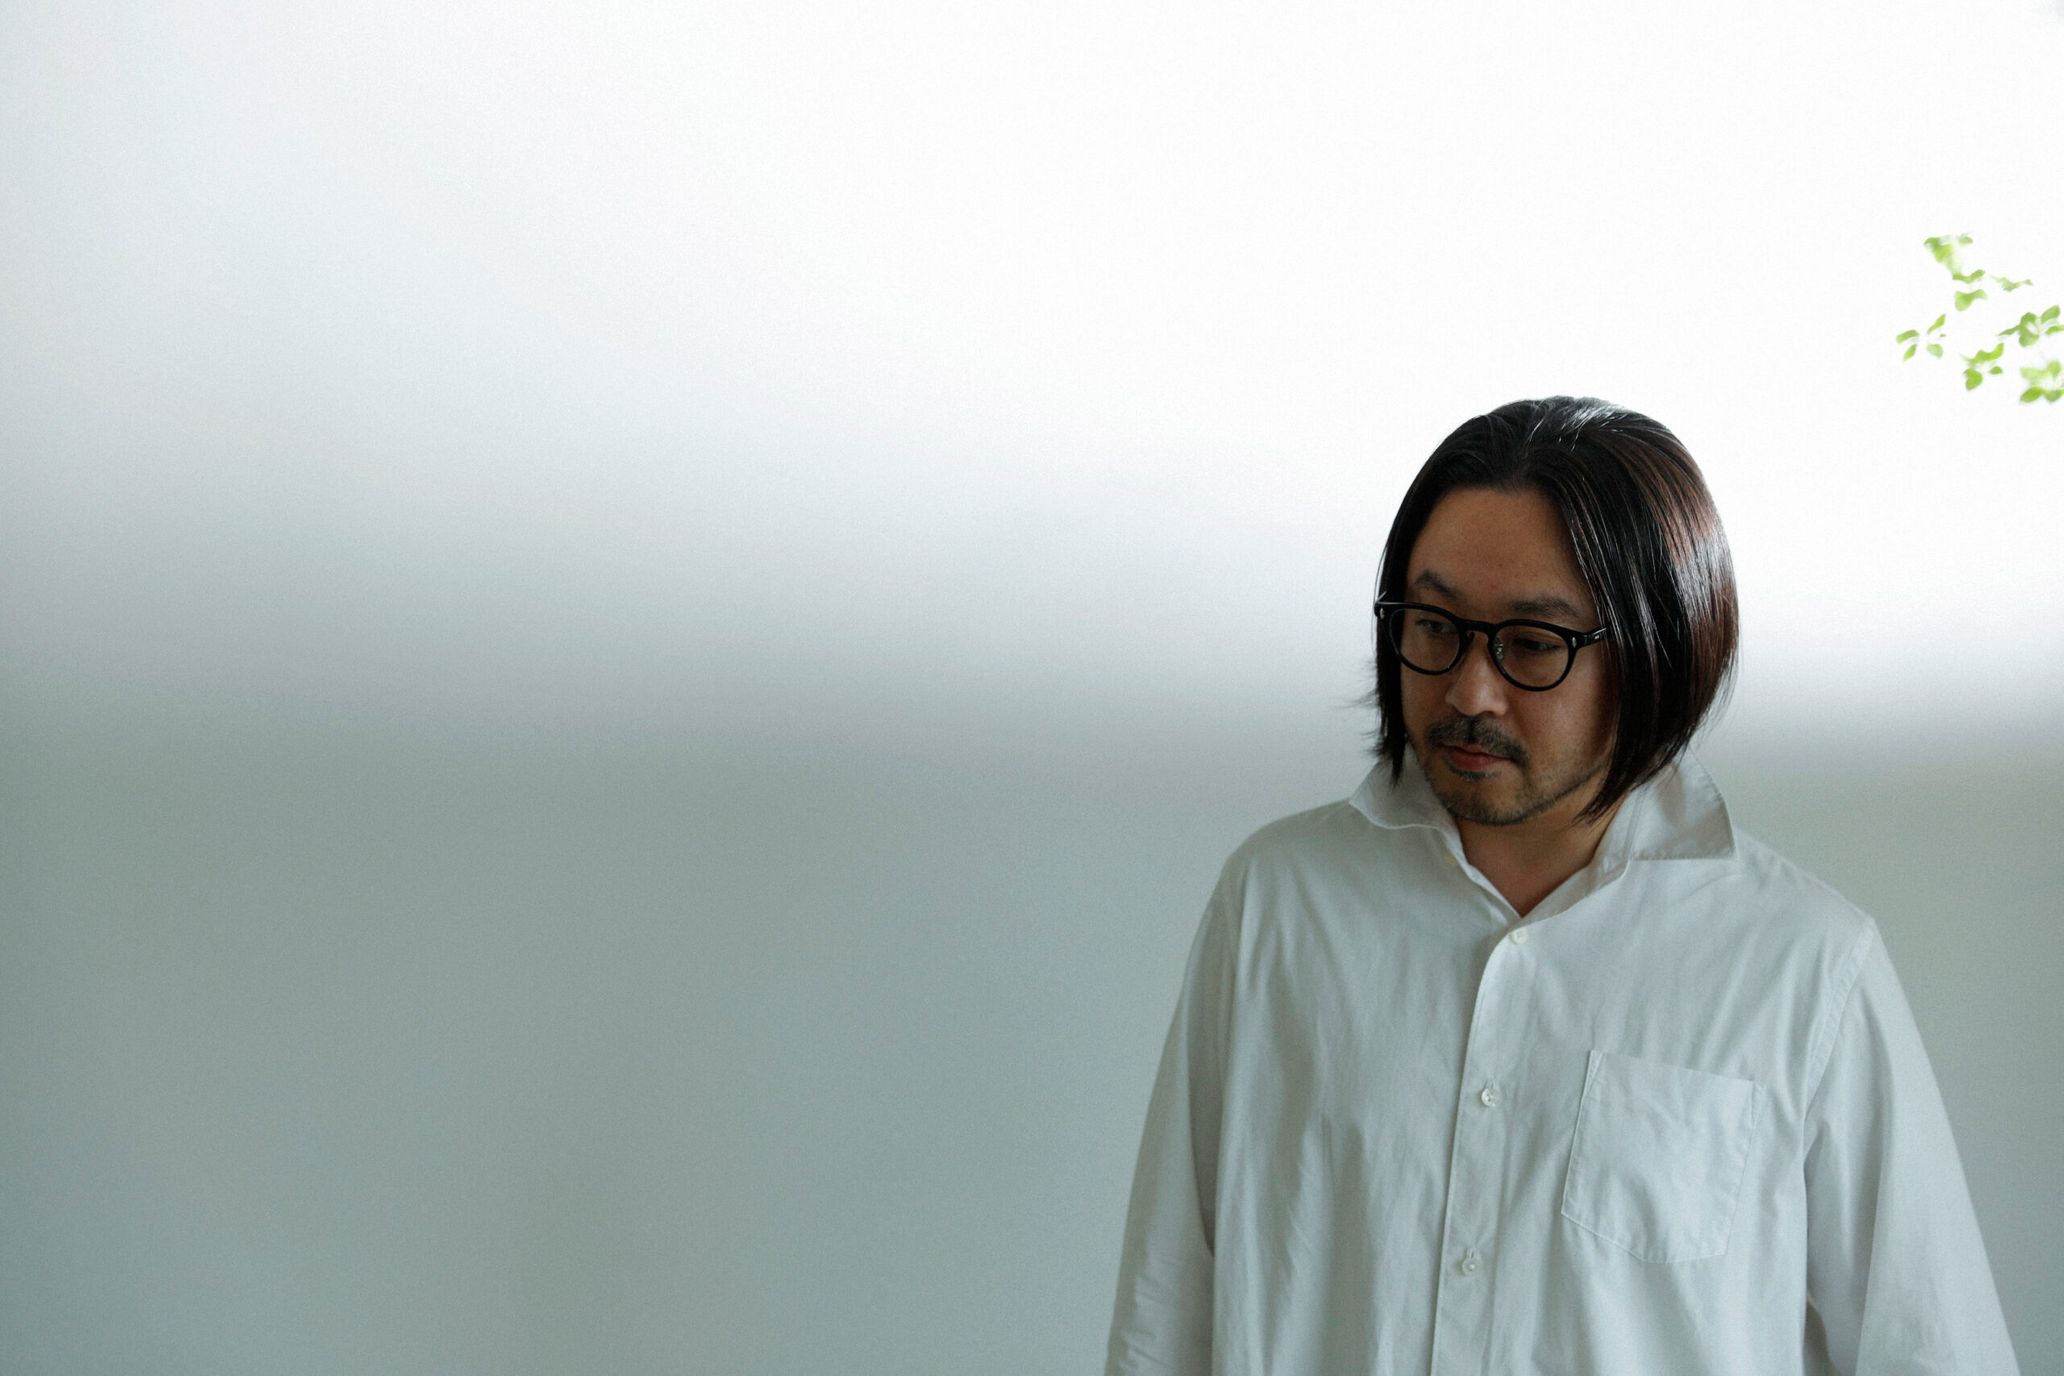 The Designer of His Eponymous Brand, Fumito Ganryu vol.1–Clothes